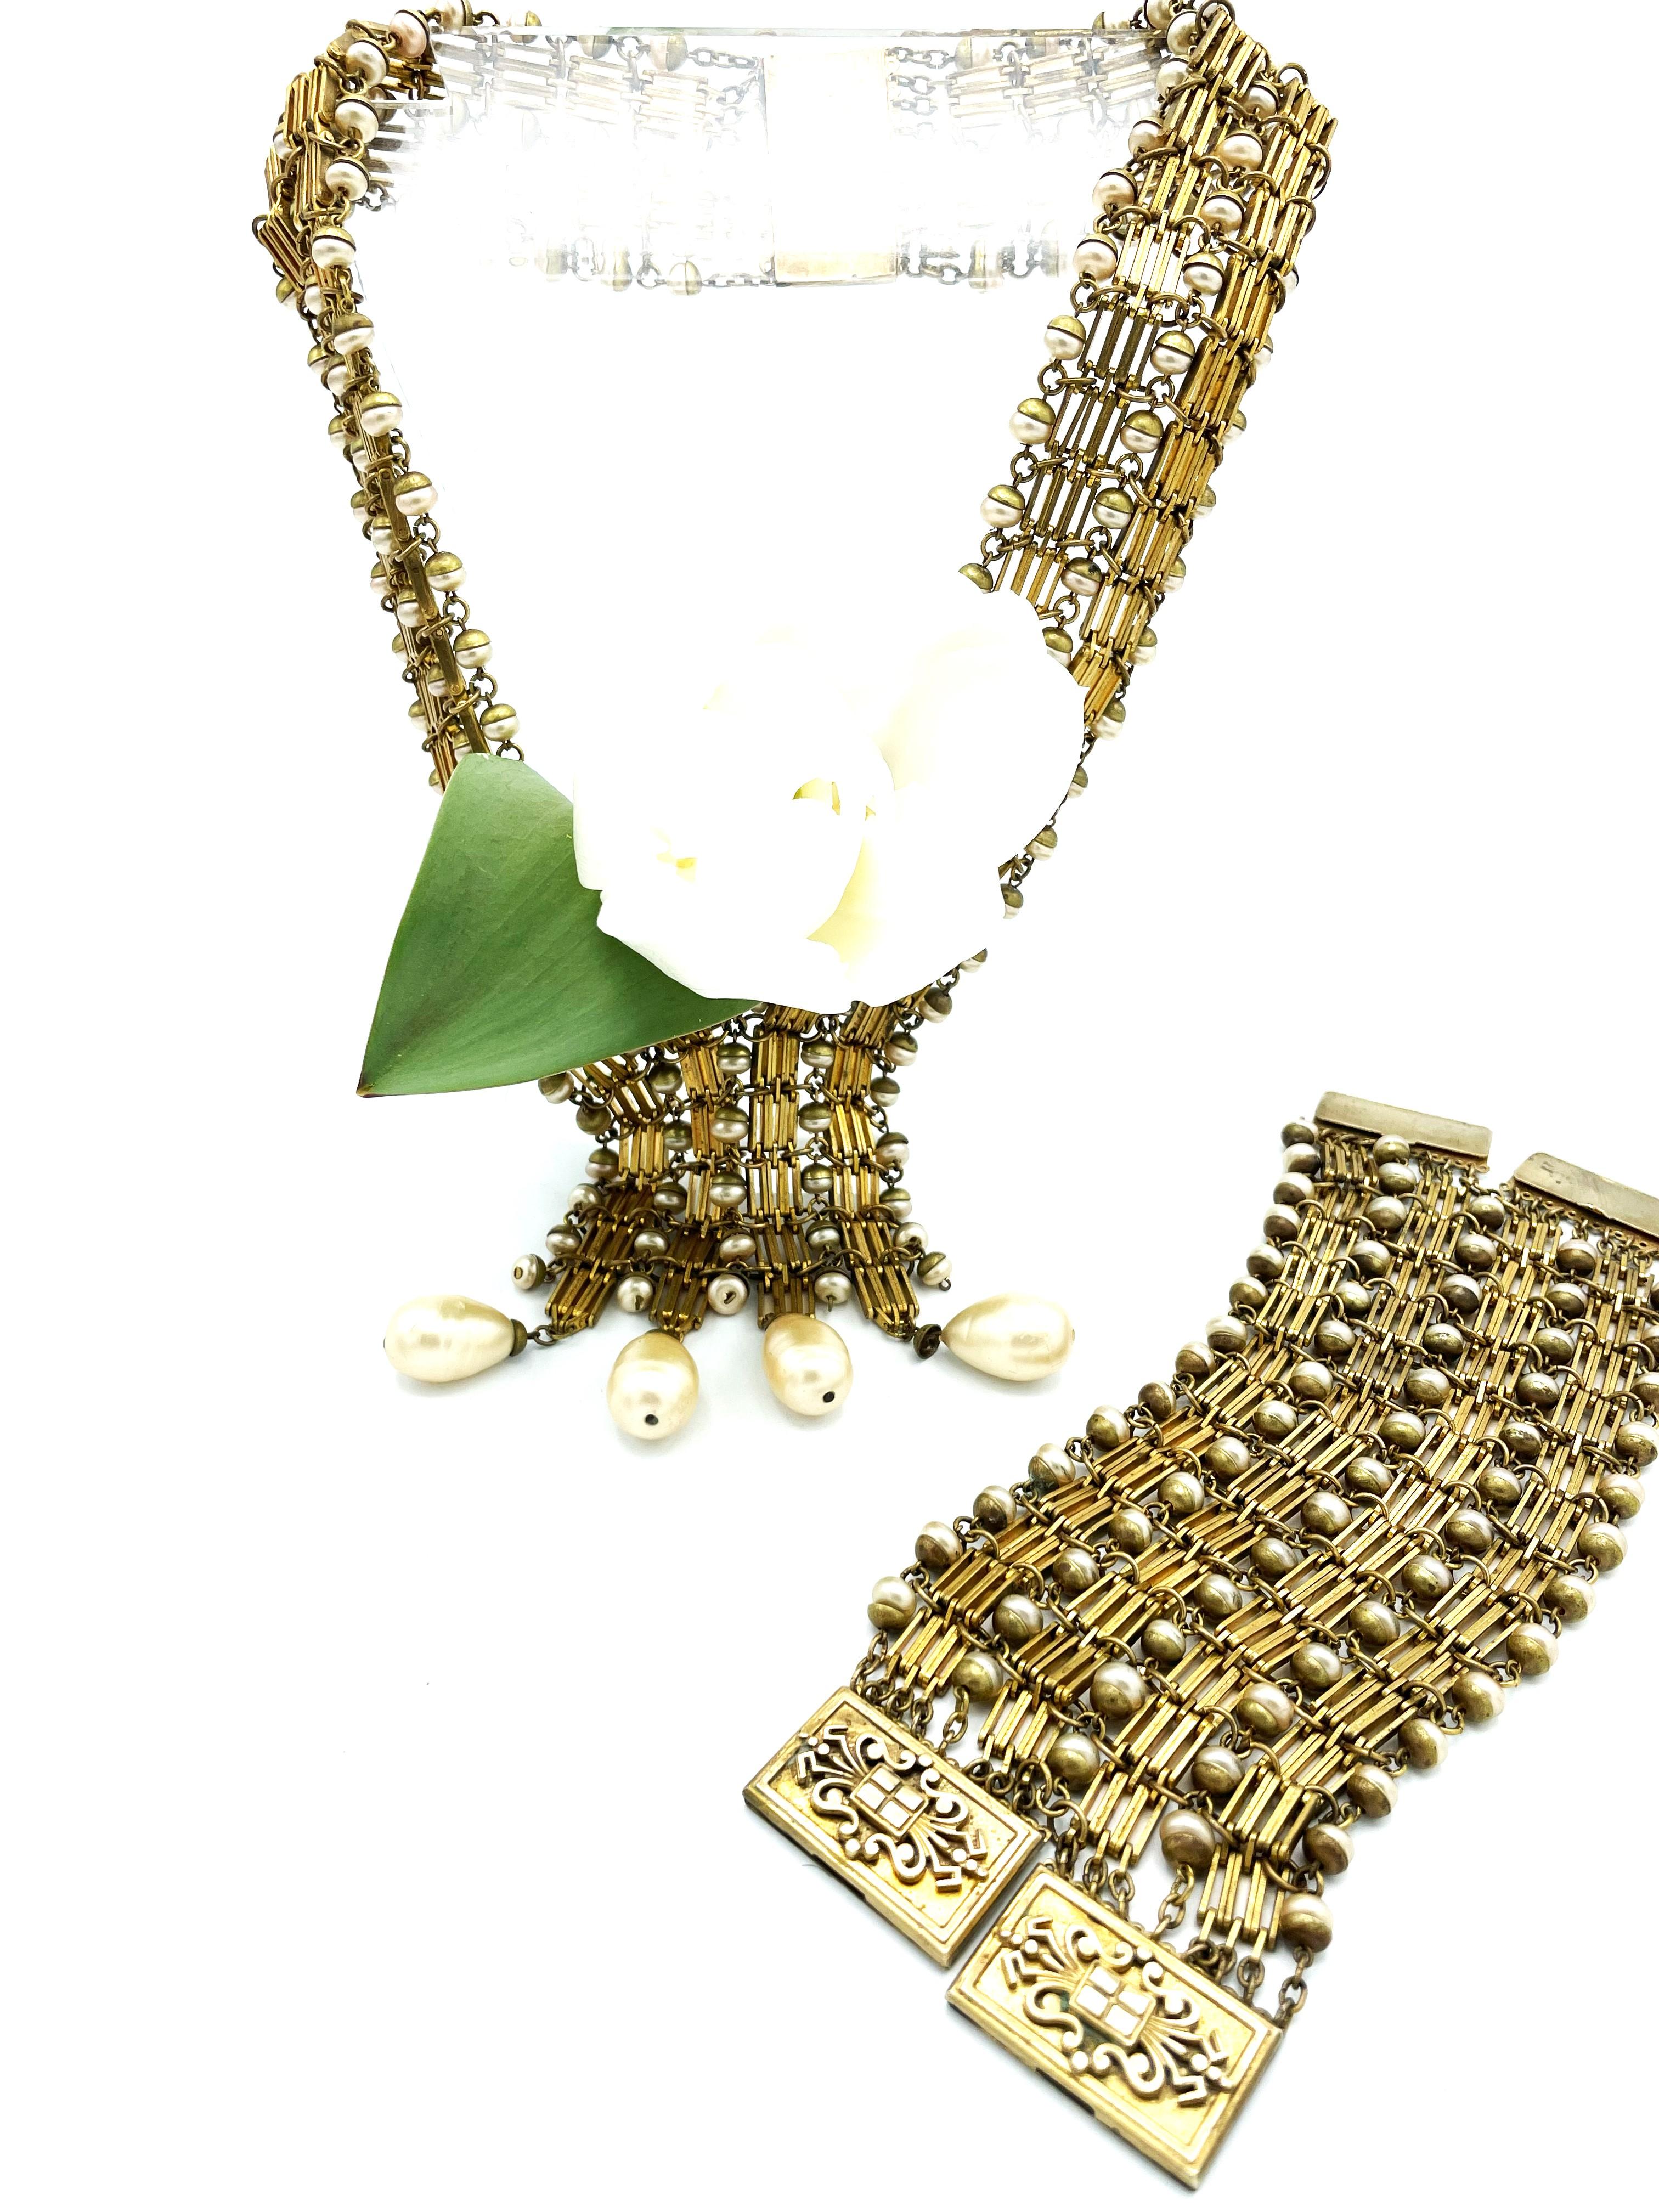  V-SHAPED NECKLACE, early 1940's, gold plated, handmade pearls, Made in France  For Sale 7